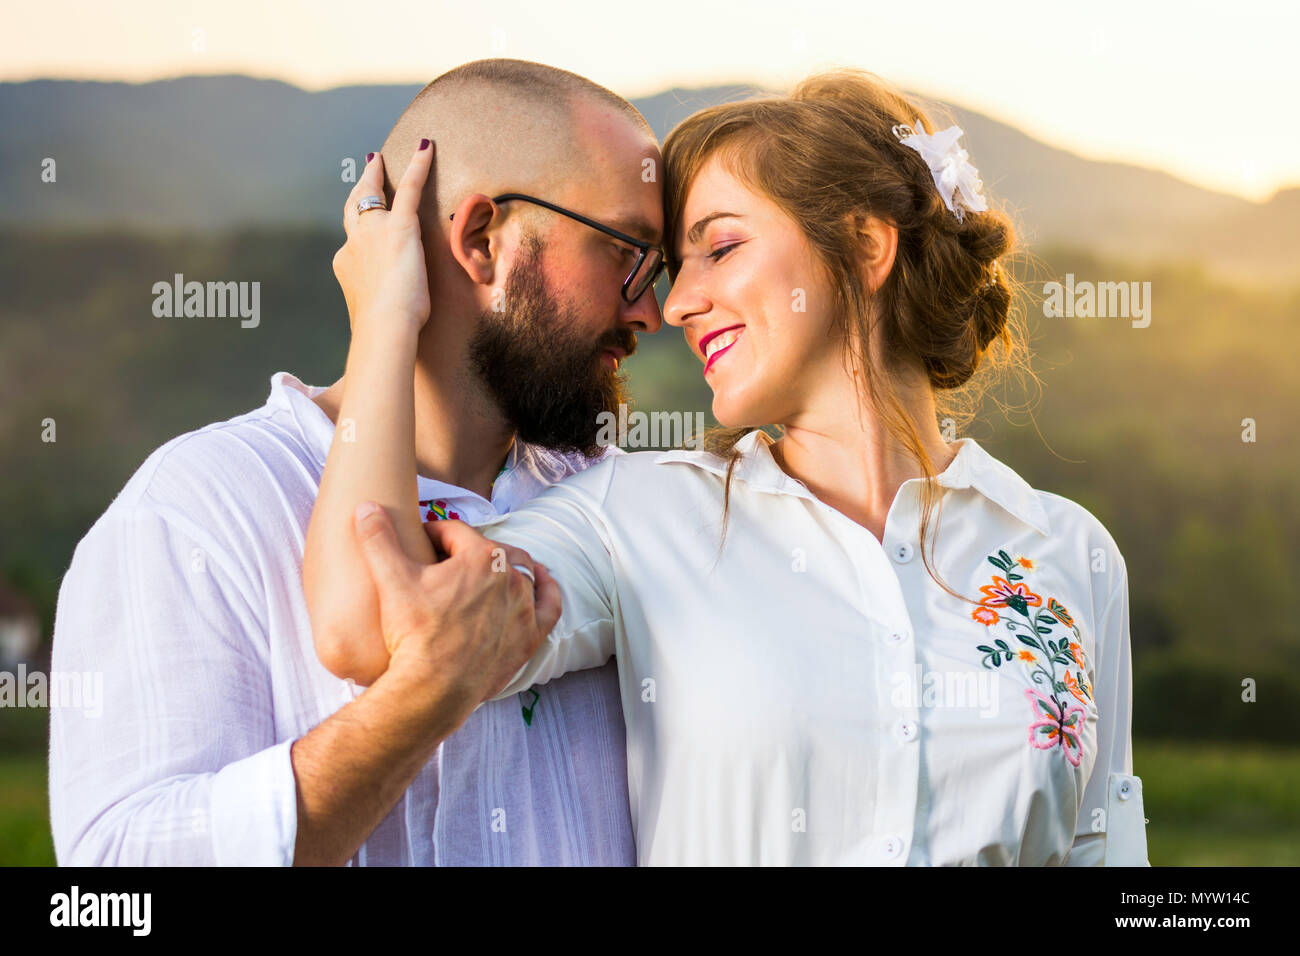 Passionate couple looking each other before kiss at sunset Stock Photo